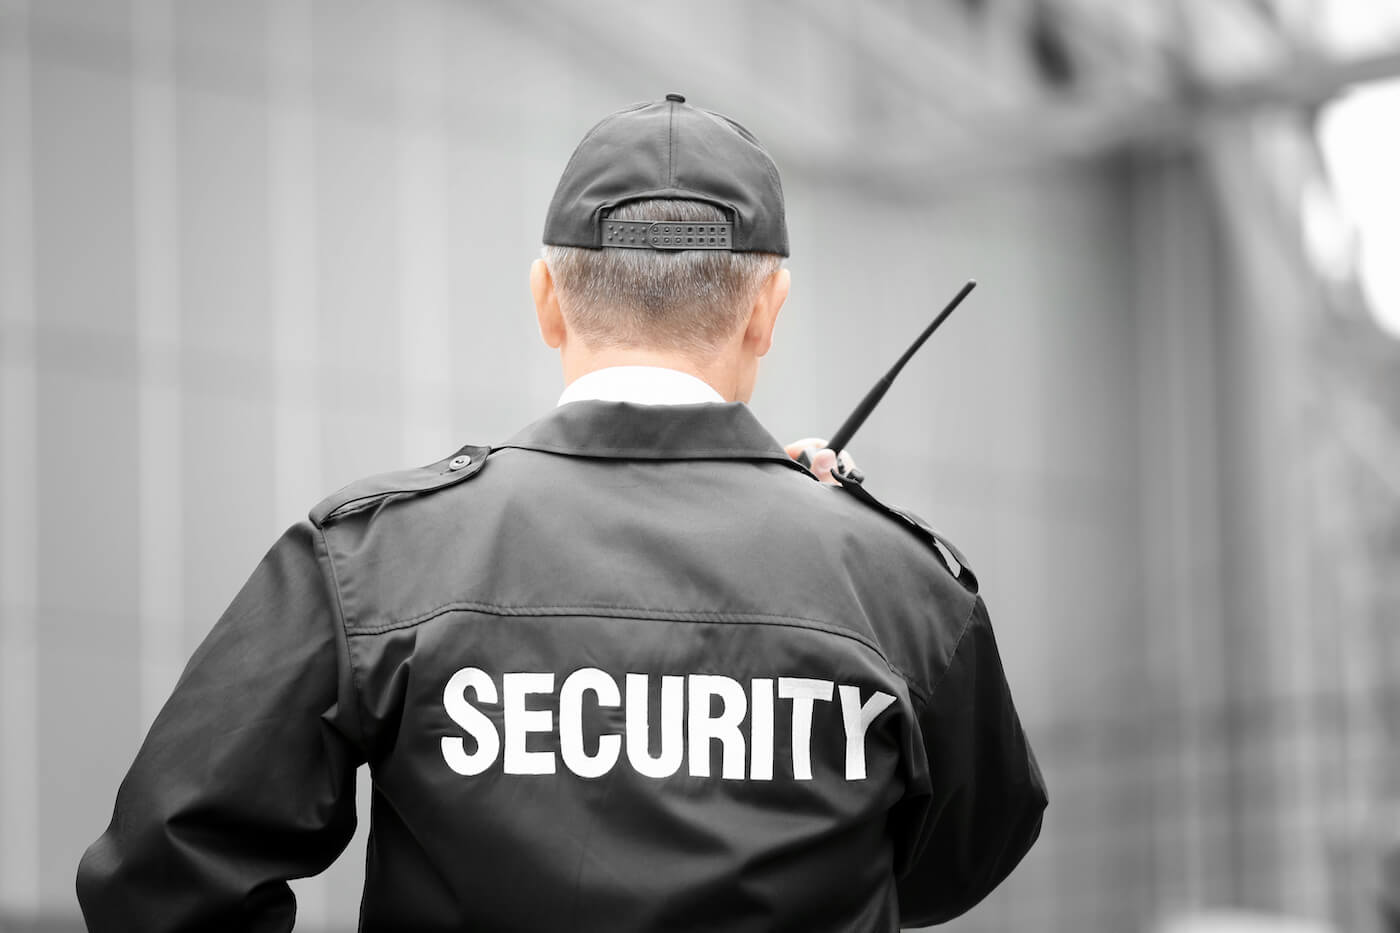 Man wearing a security jacket